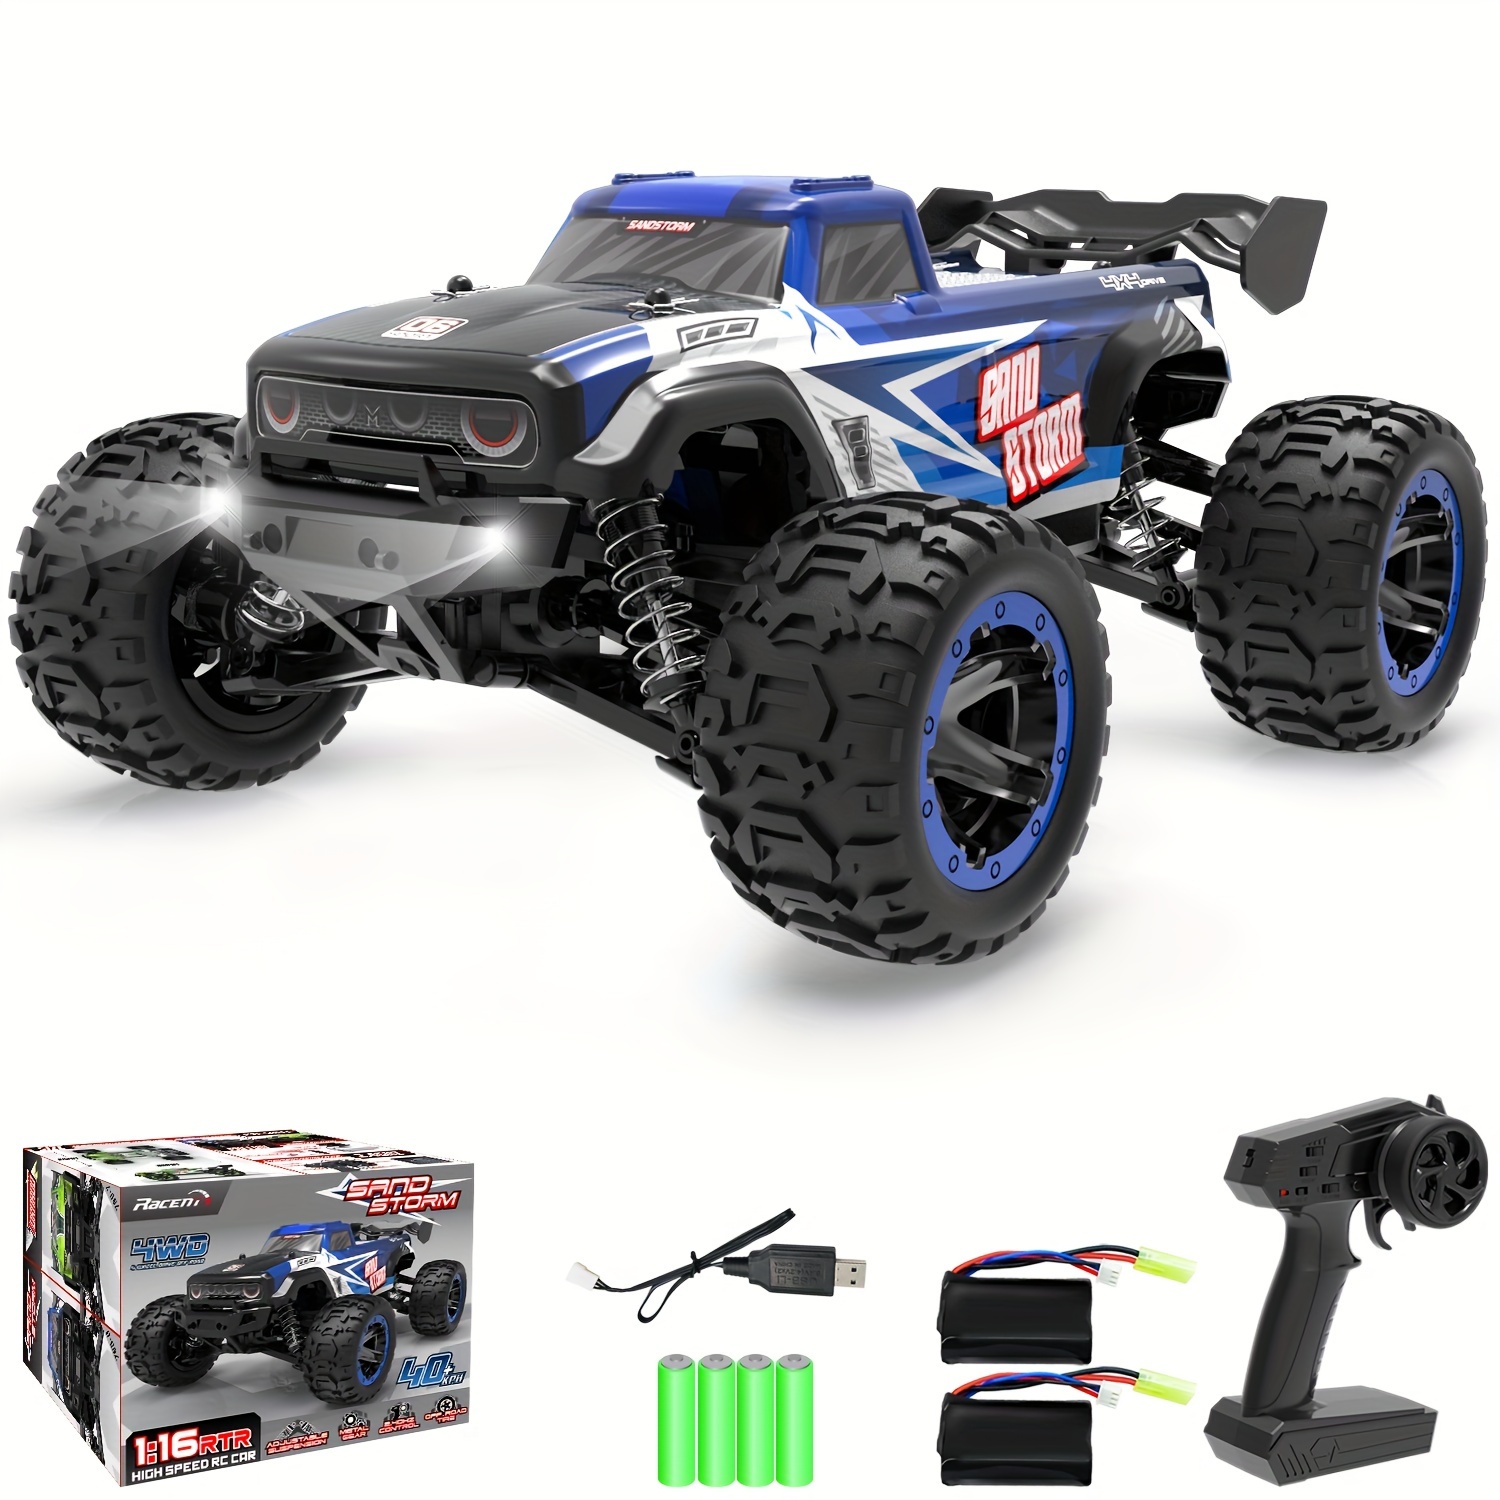 

Rc Car , 1:16 Scale All Terrain Monster Truck, 40kph 4wd Off Road Fast Remote Control Toy 2.4ghz High Speed Electric Vehicle With 2 Rechargeable Batteries, Gift For Boys Adults